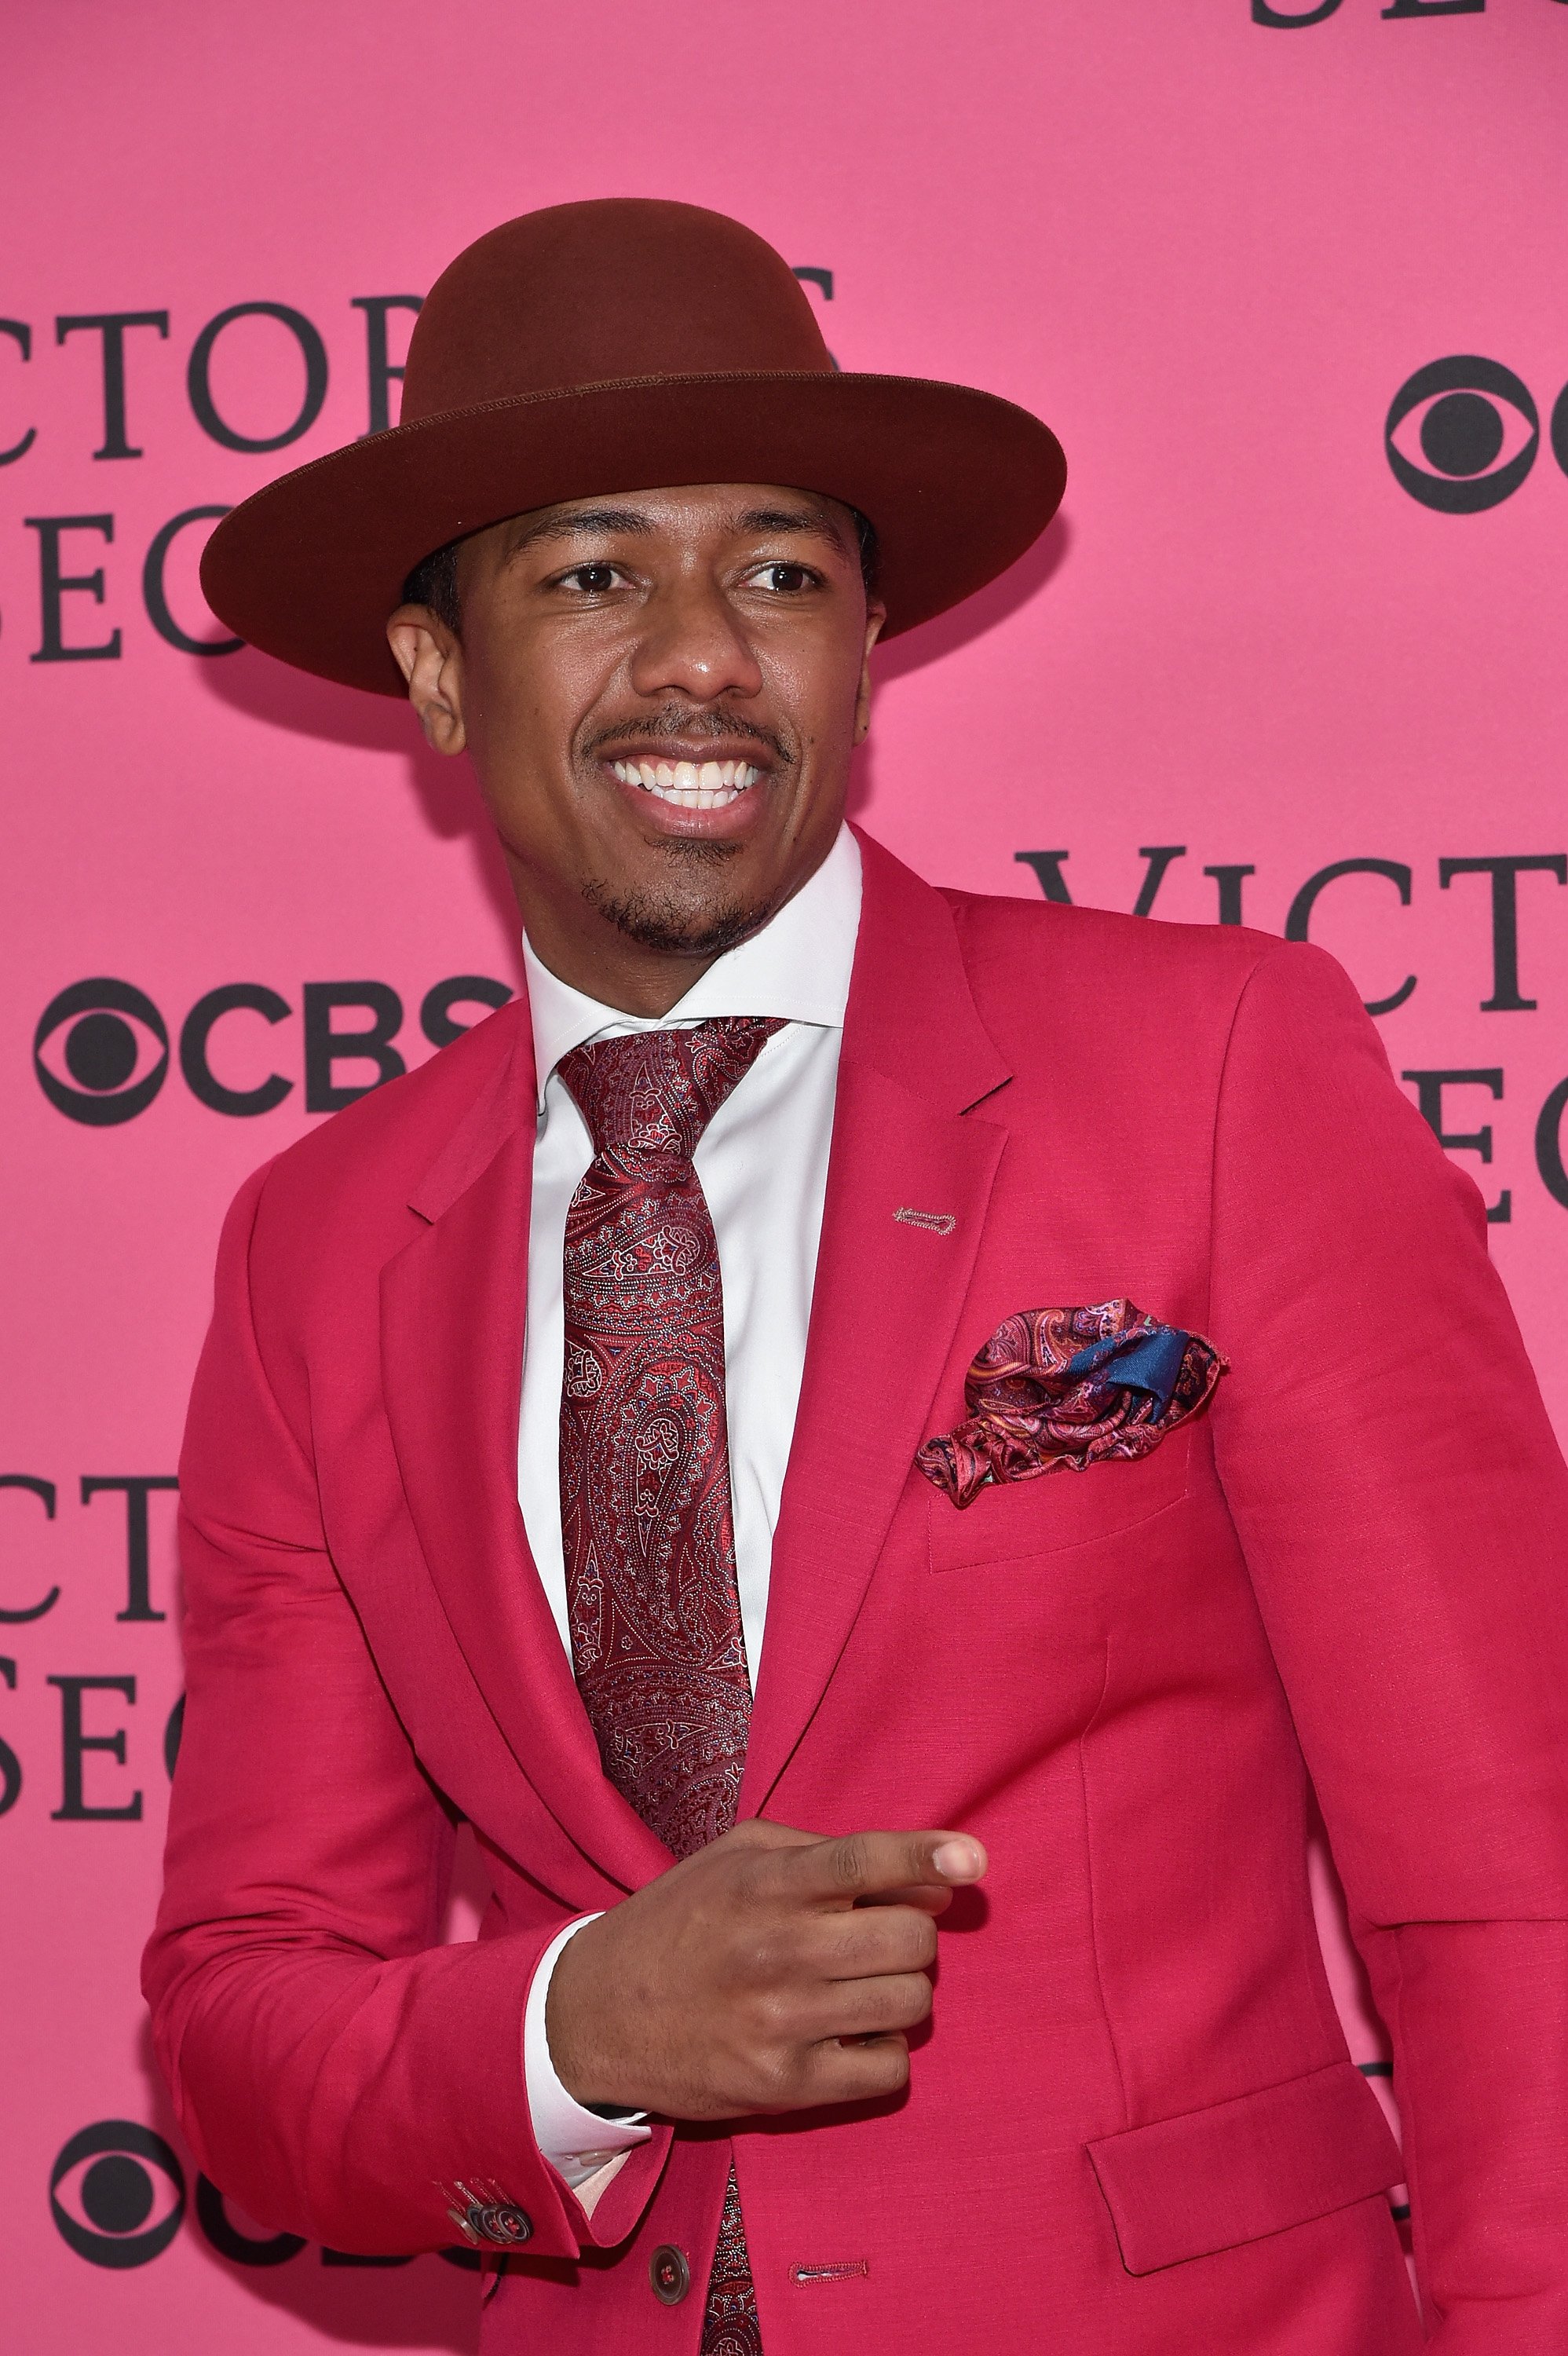 Nick Cannon attends Victoria's Secret Fashion Show at Lexington Avenue Armory on November 10, 2015 in New York City | Photo: Getty Images